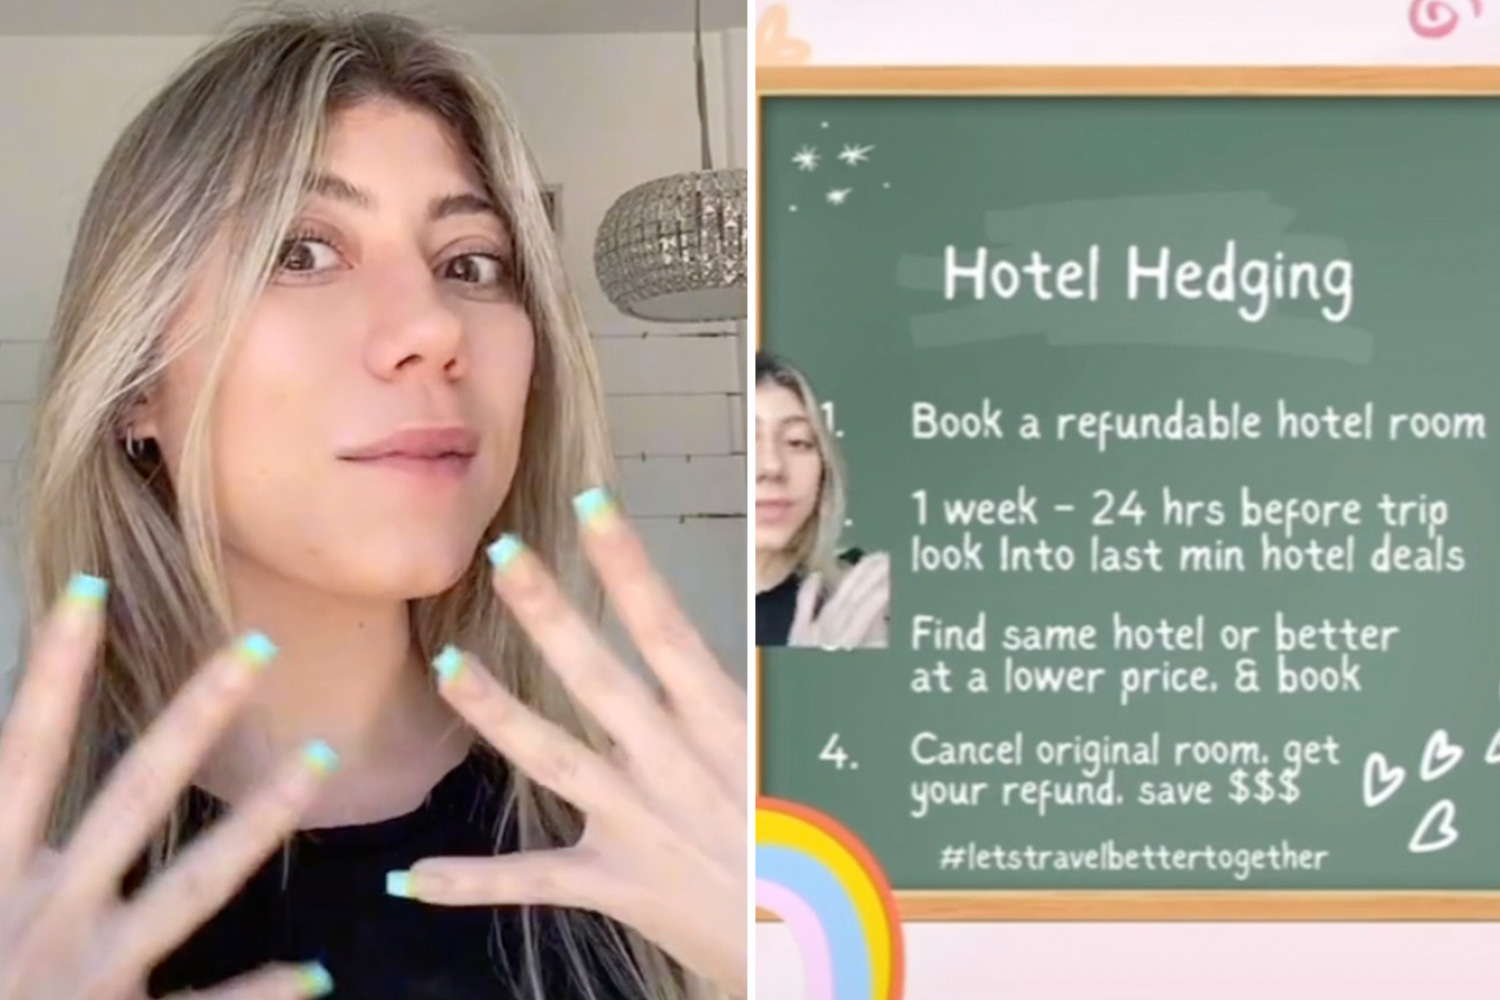 Traveller reveals how to save money on hotels when you travel - it's very simple